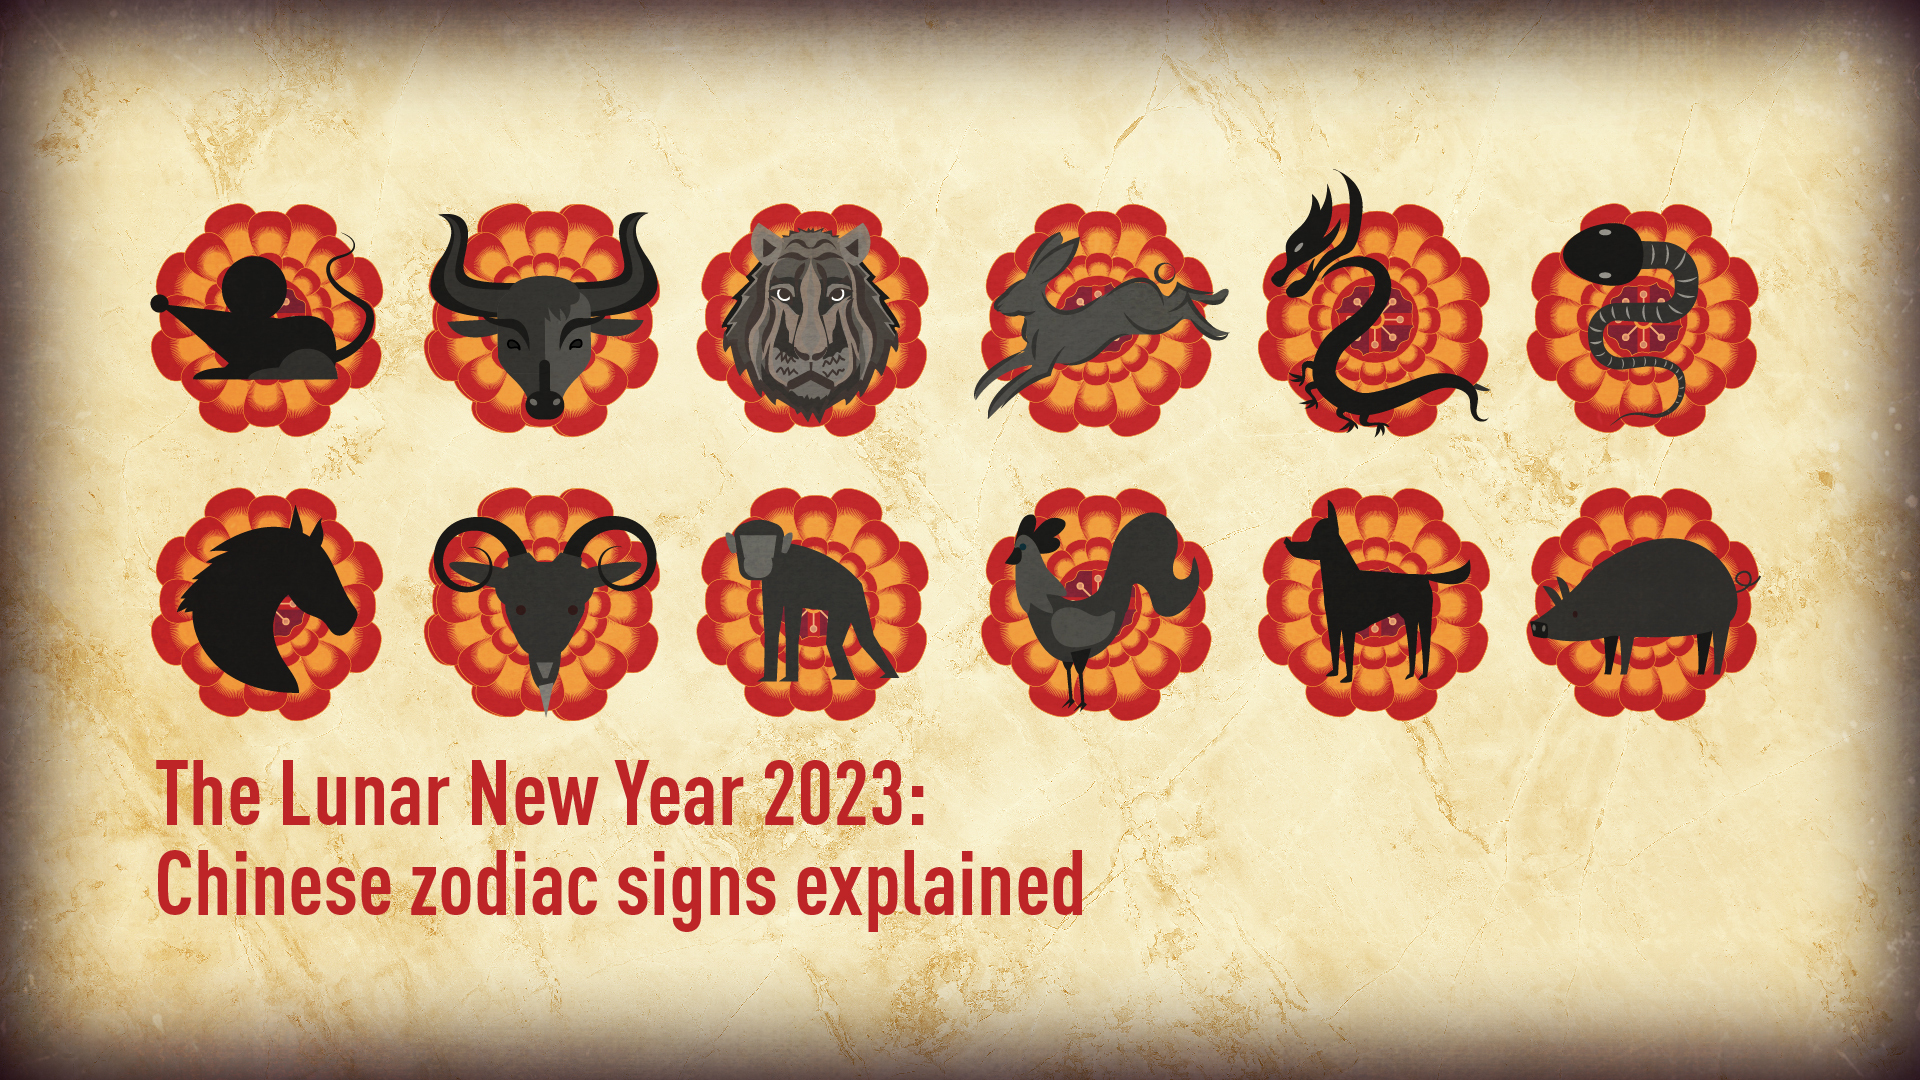 The Lunar New Year 2023: Chinese zodiac signs explained